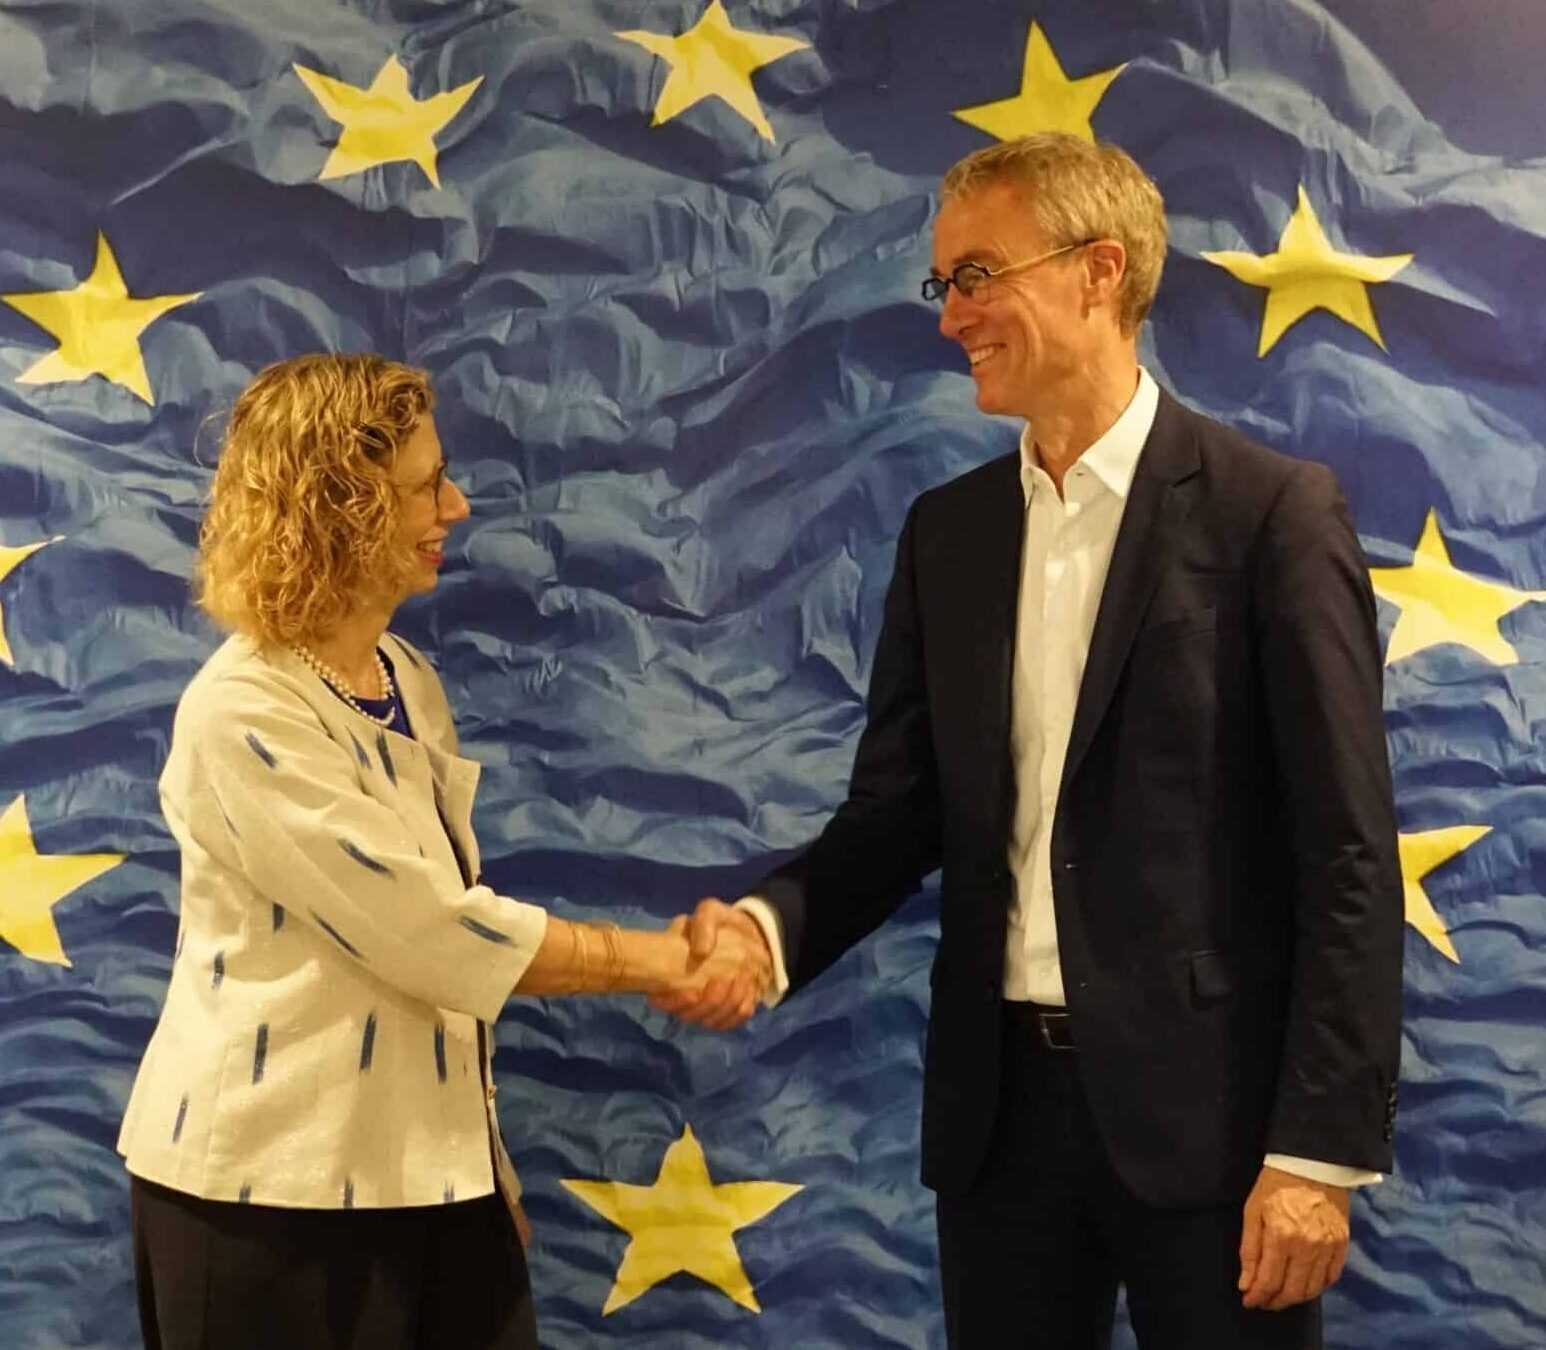 The Director General of the EU Partnerships Koen Doens and the Executive Director of the United Nations Environment Programme (UNEP) Inger Andersen shake hands in front of a EU flag at the PAGE 14th Steering Committee held in Brussels in June 2023.